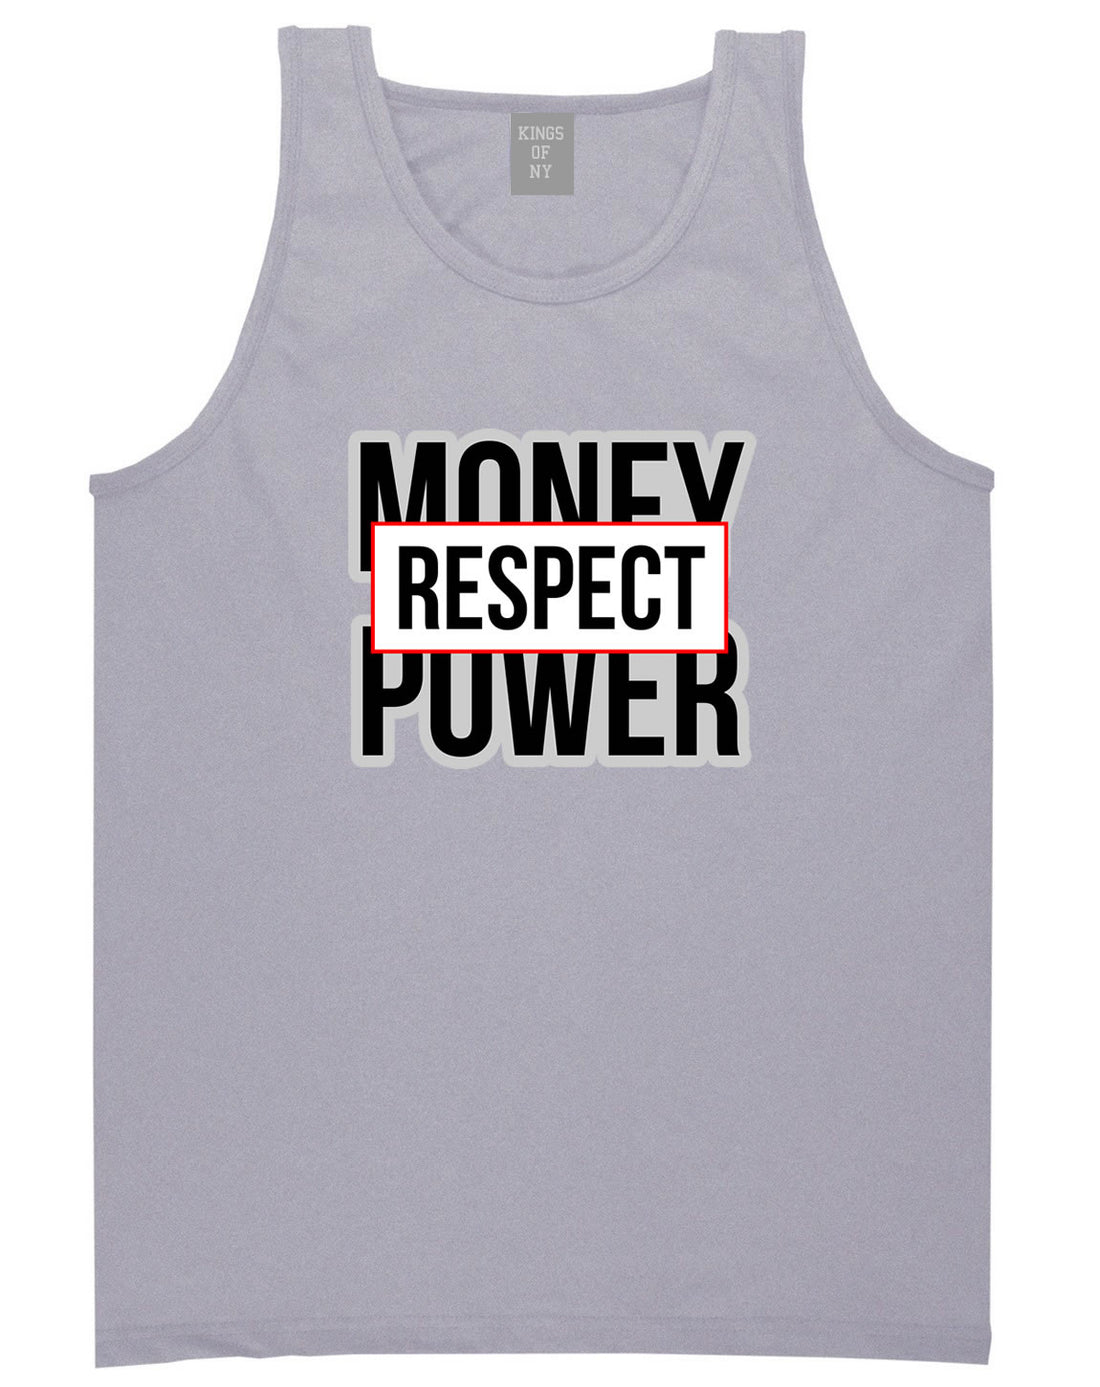 Money Power Respect Tank Top in Grey By Kings Of NY